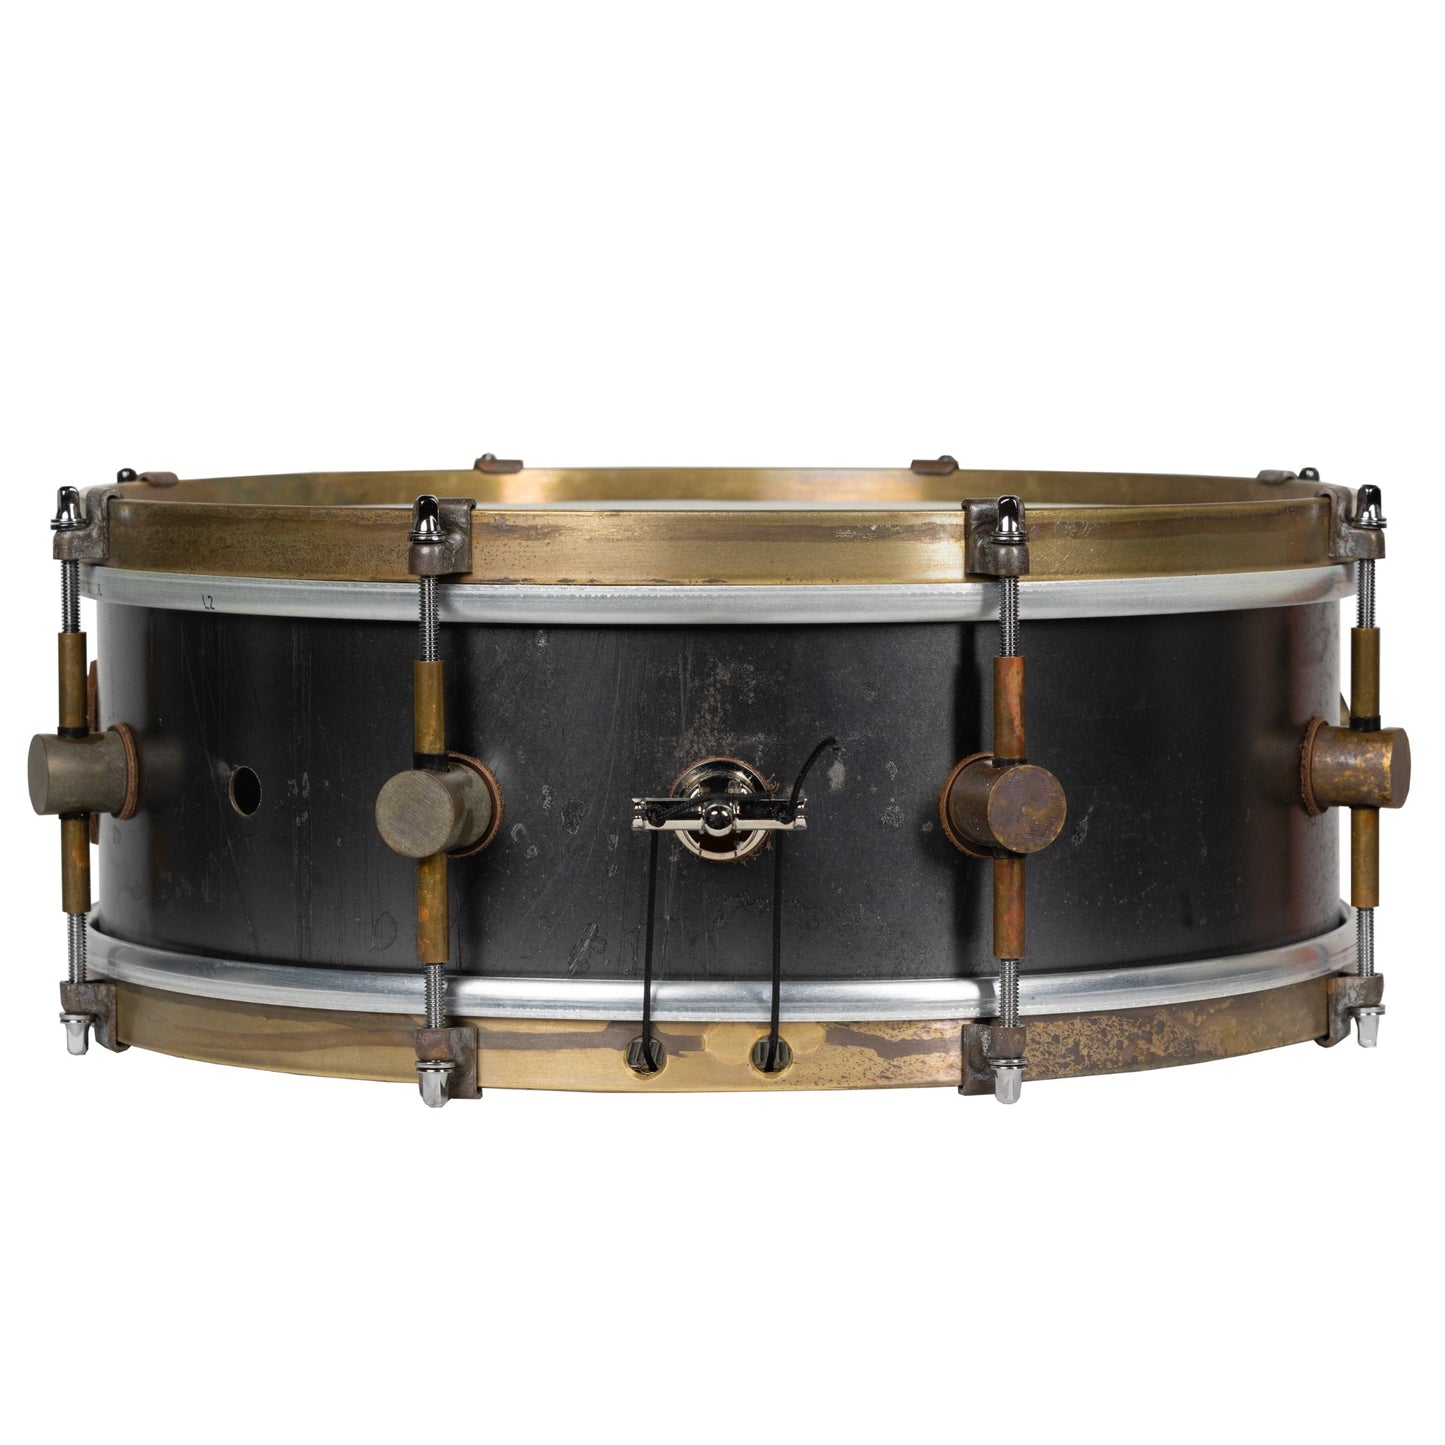 A&F Drum Company 5x14 Snare Drum - Raw Steel